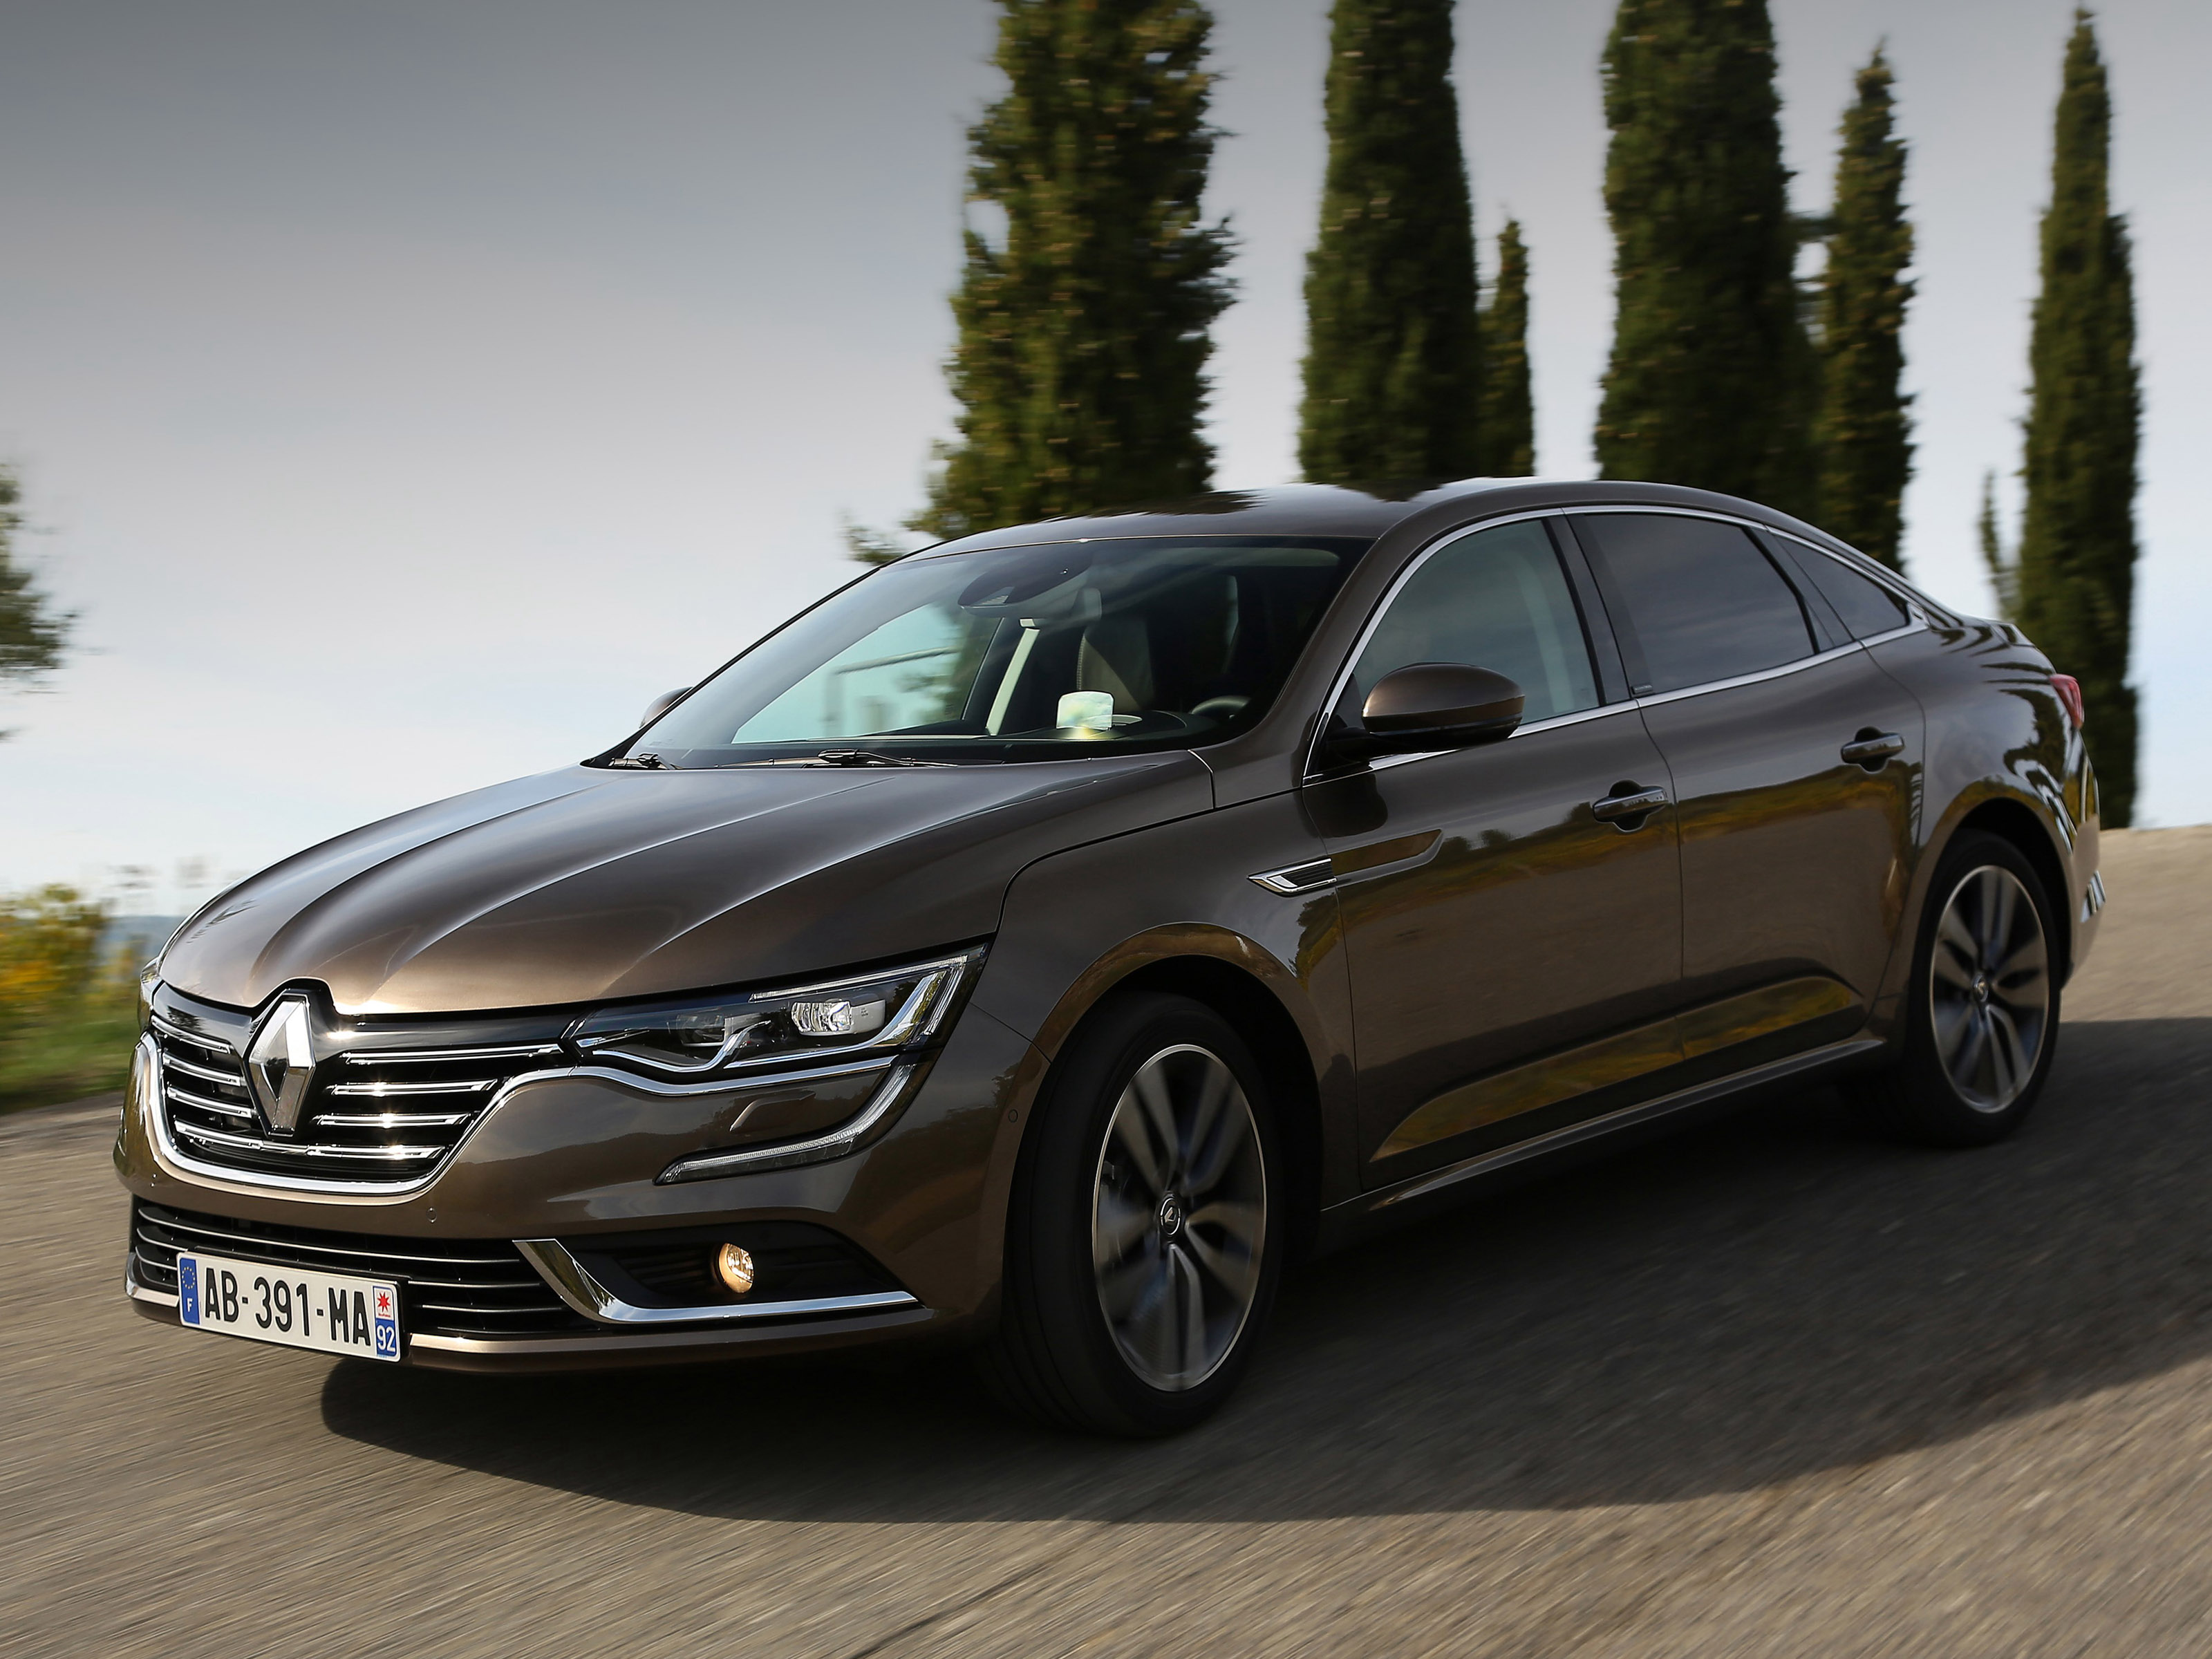 Renault Talisman hd specifications